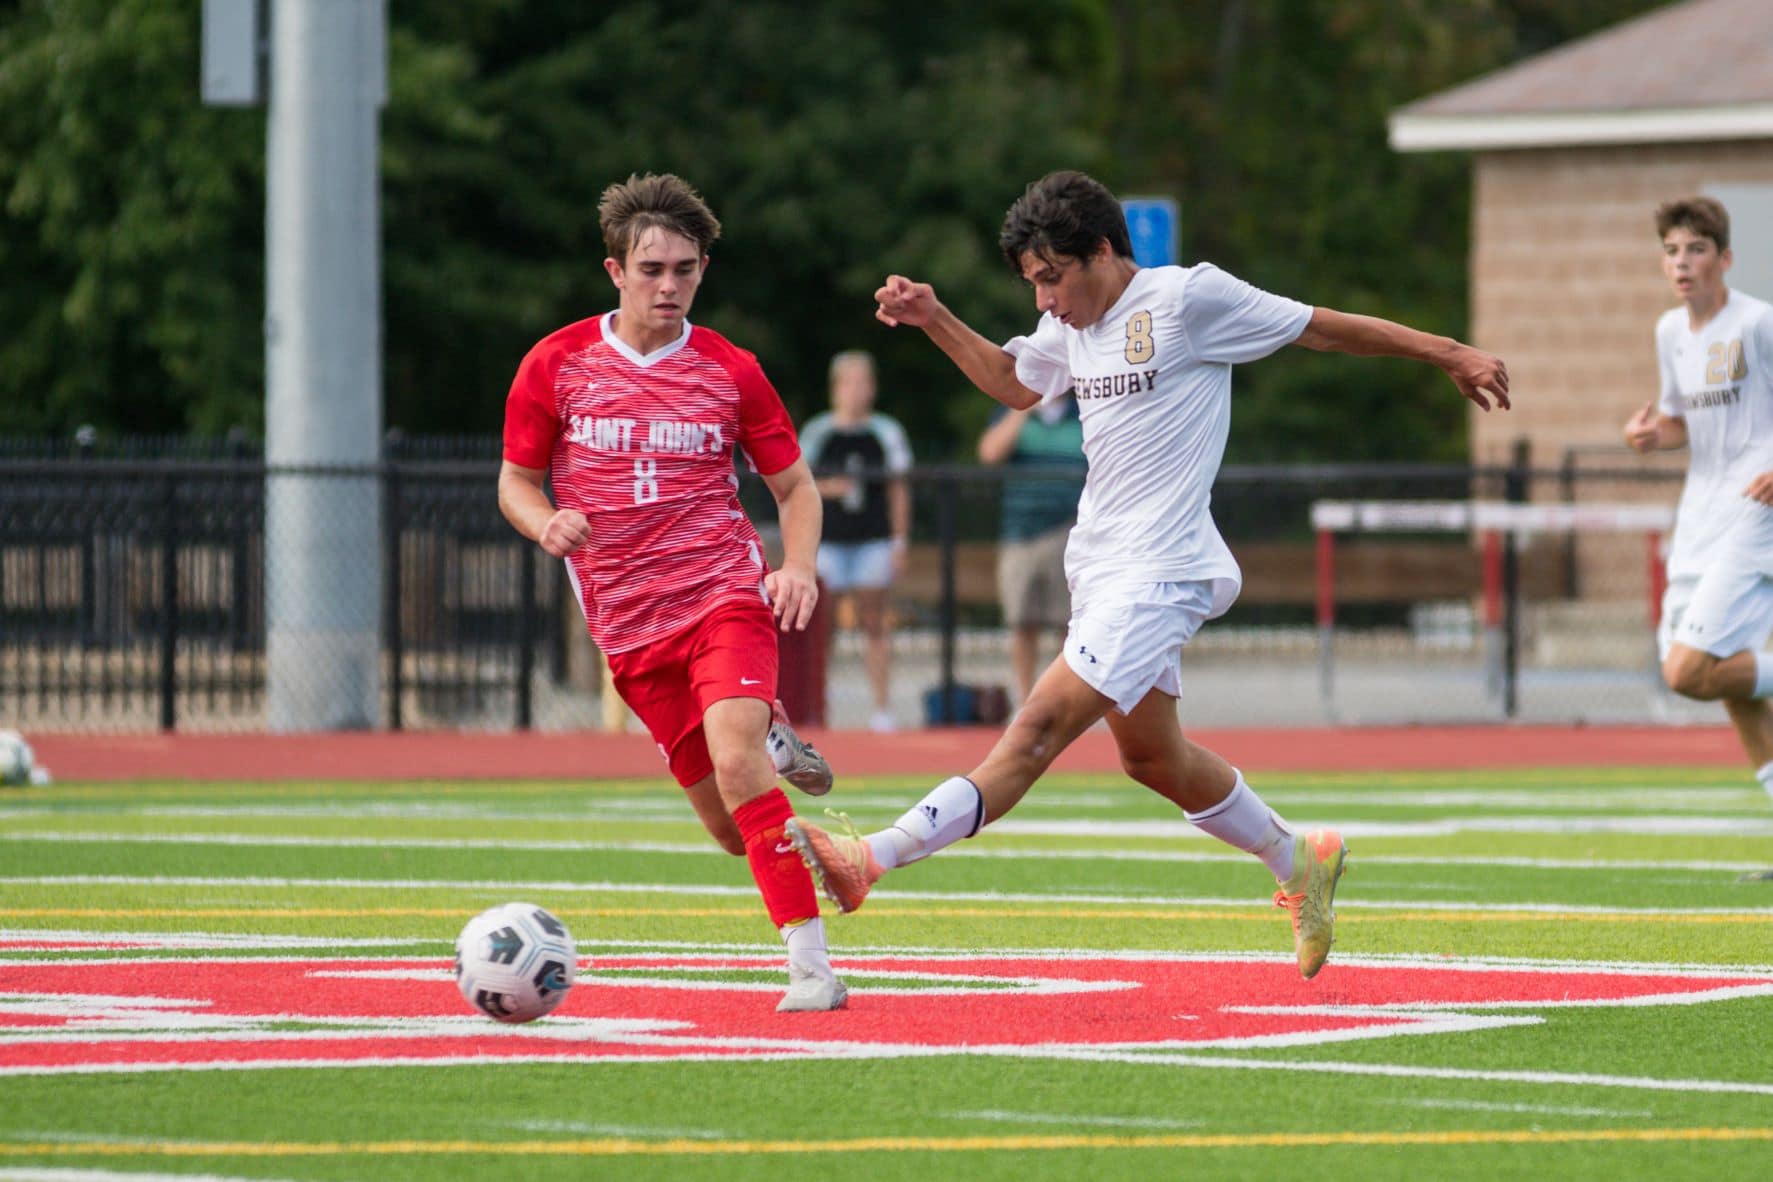 Shrewsbury boys soccer falls to St. Johns in competitive cross-town matchup